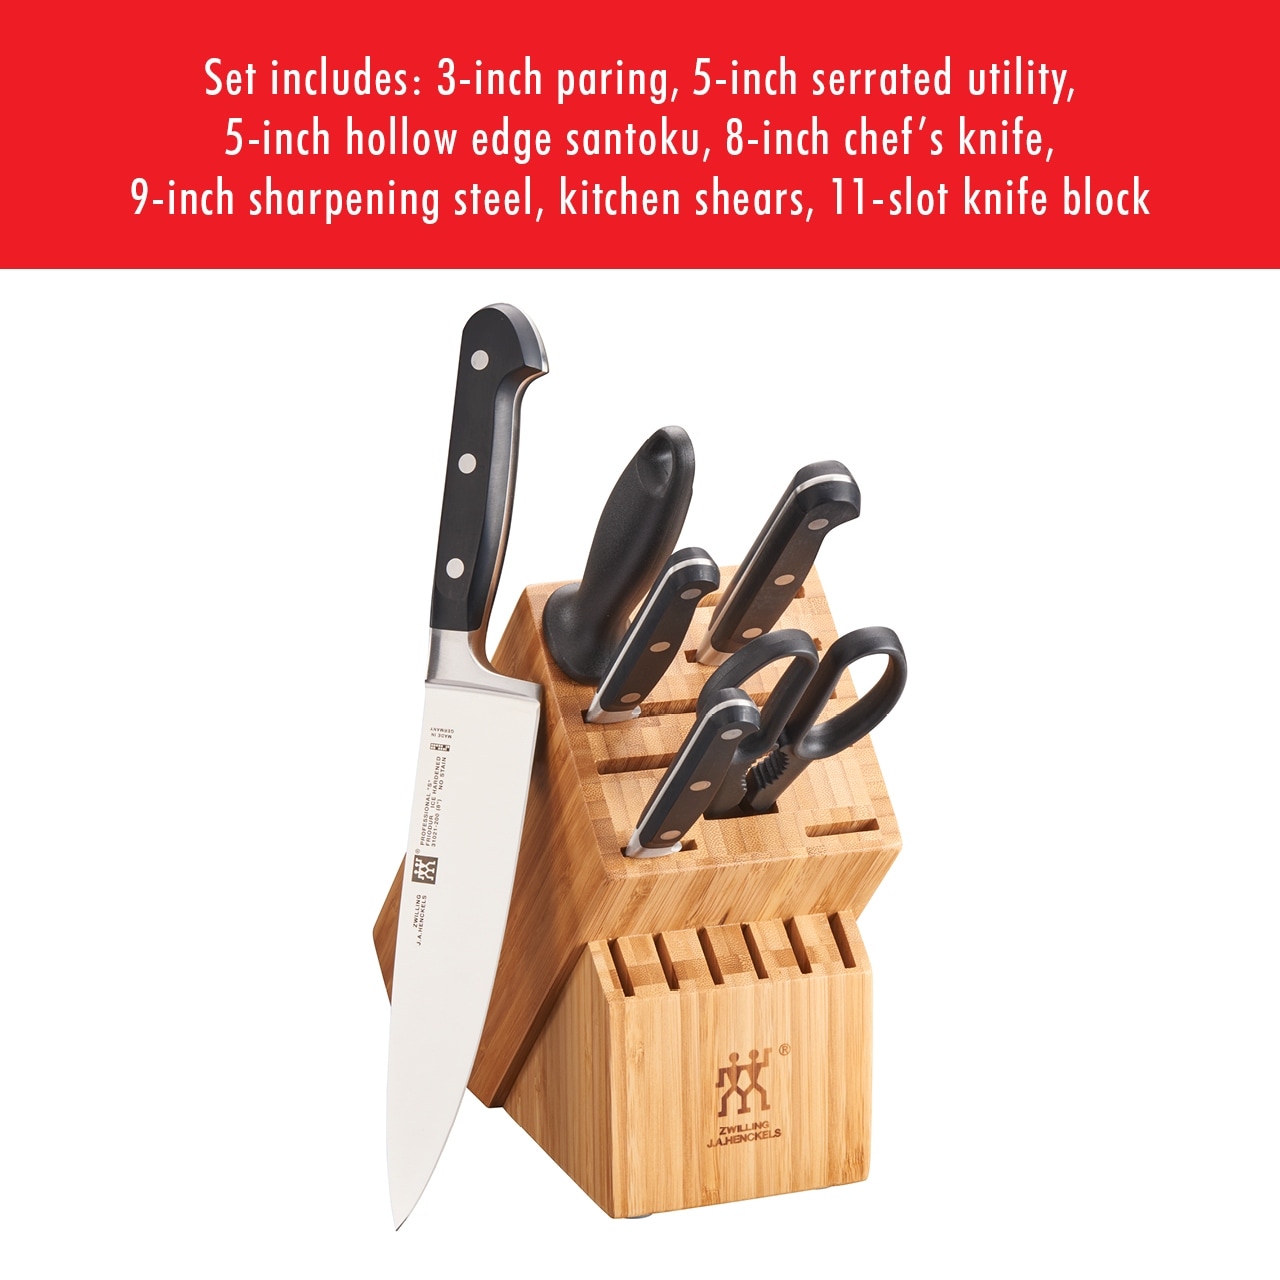 https://ak1.ostkcdn.com/images/products/is/images/direct/4b3a0102035152776c90da60ea884d70fd7db60d/ZWILLING-Professional-S-Knife-Set-with-Block%2C-Chef%E2%80%99s-Knife%2C-Serrated-Utility-Knife%2C-7-Piece%2C-Black.jpg